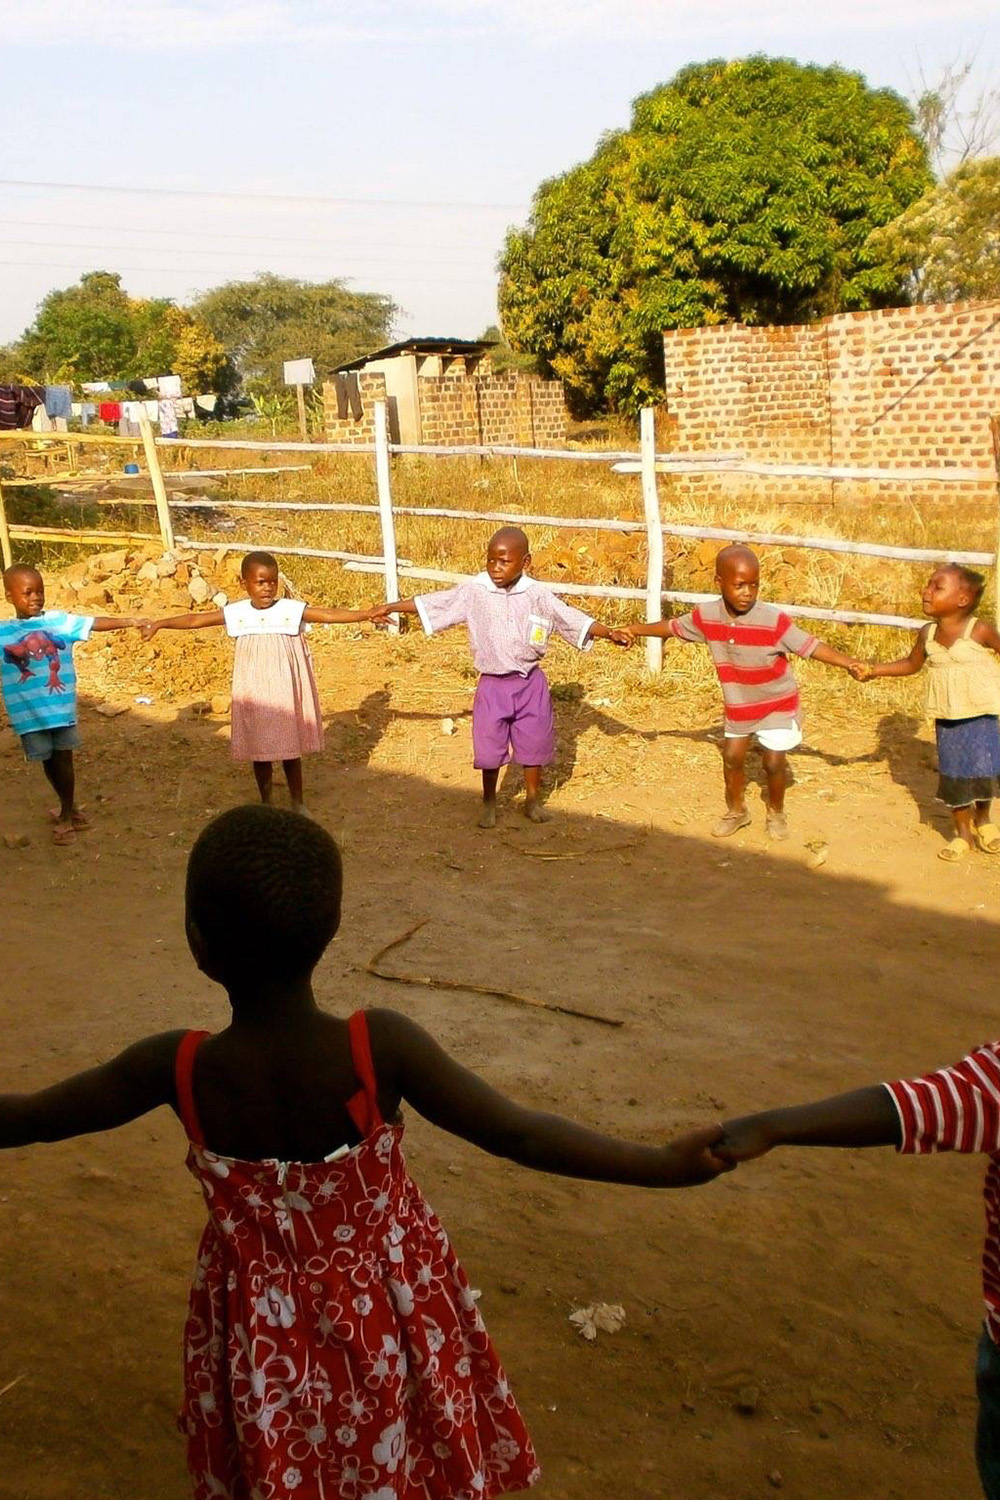 Children playing - Sponsor a child’s education in Africa - Chances for Children